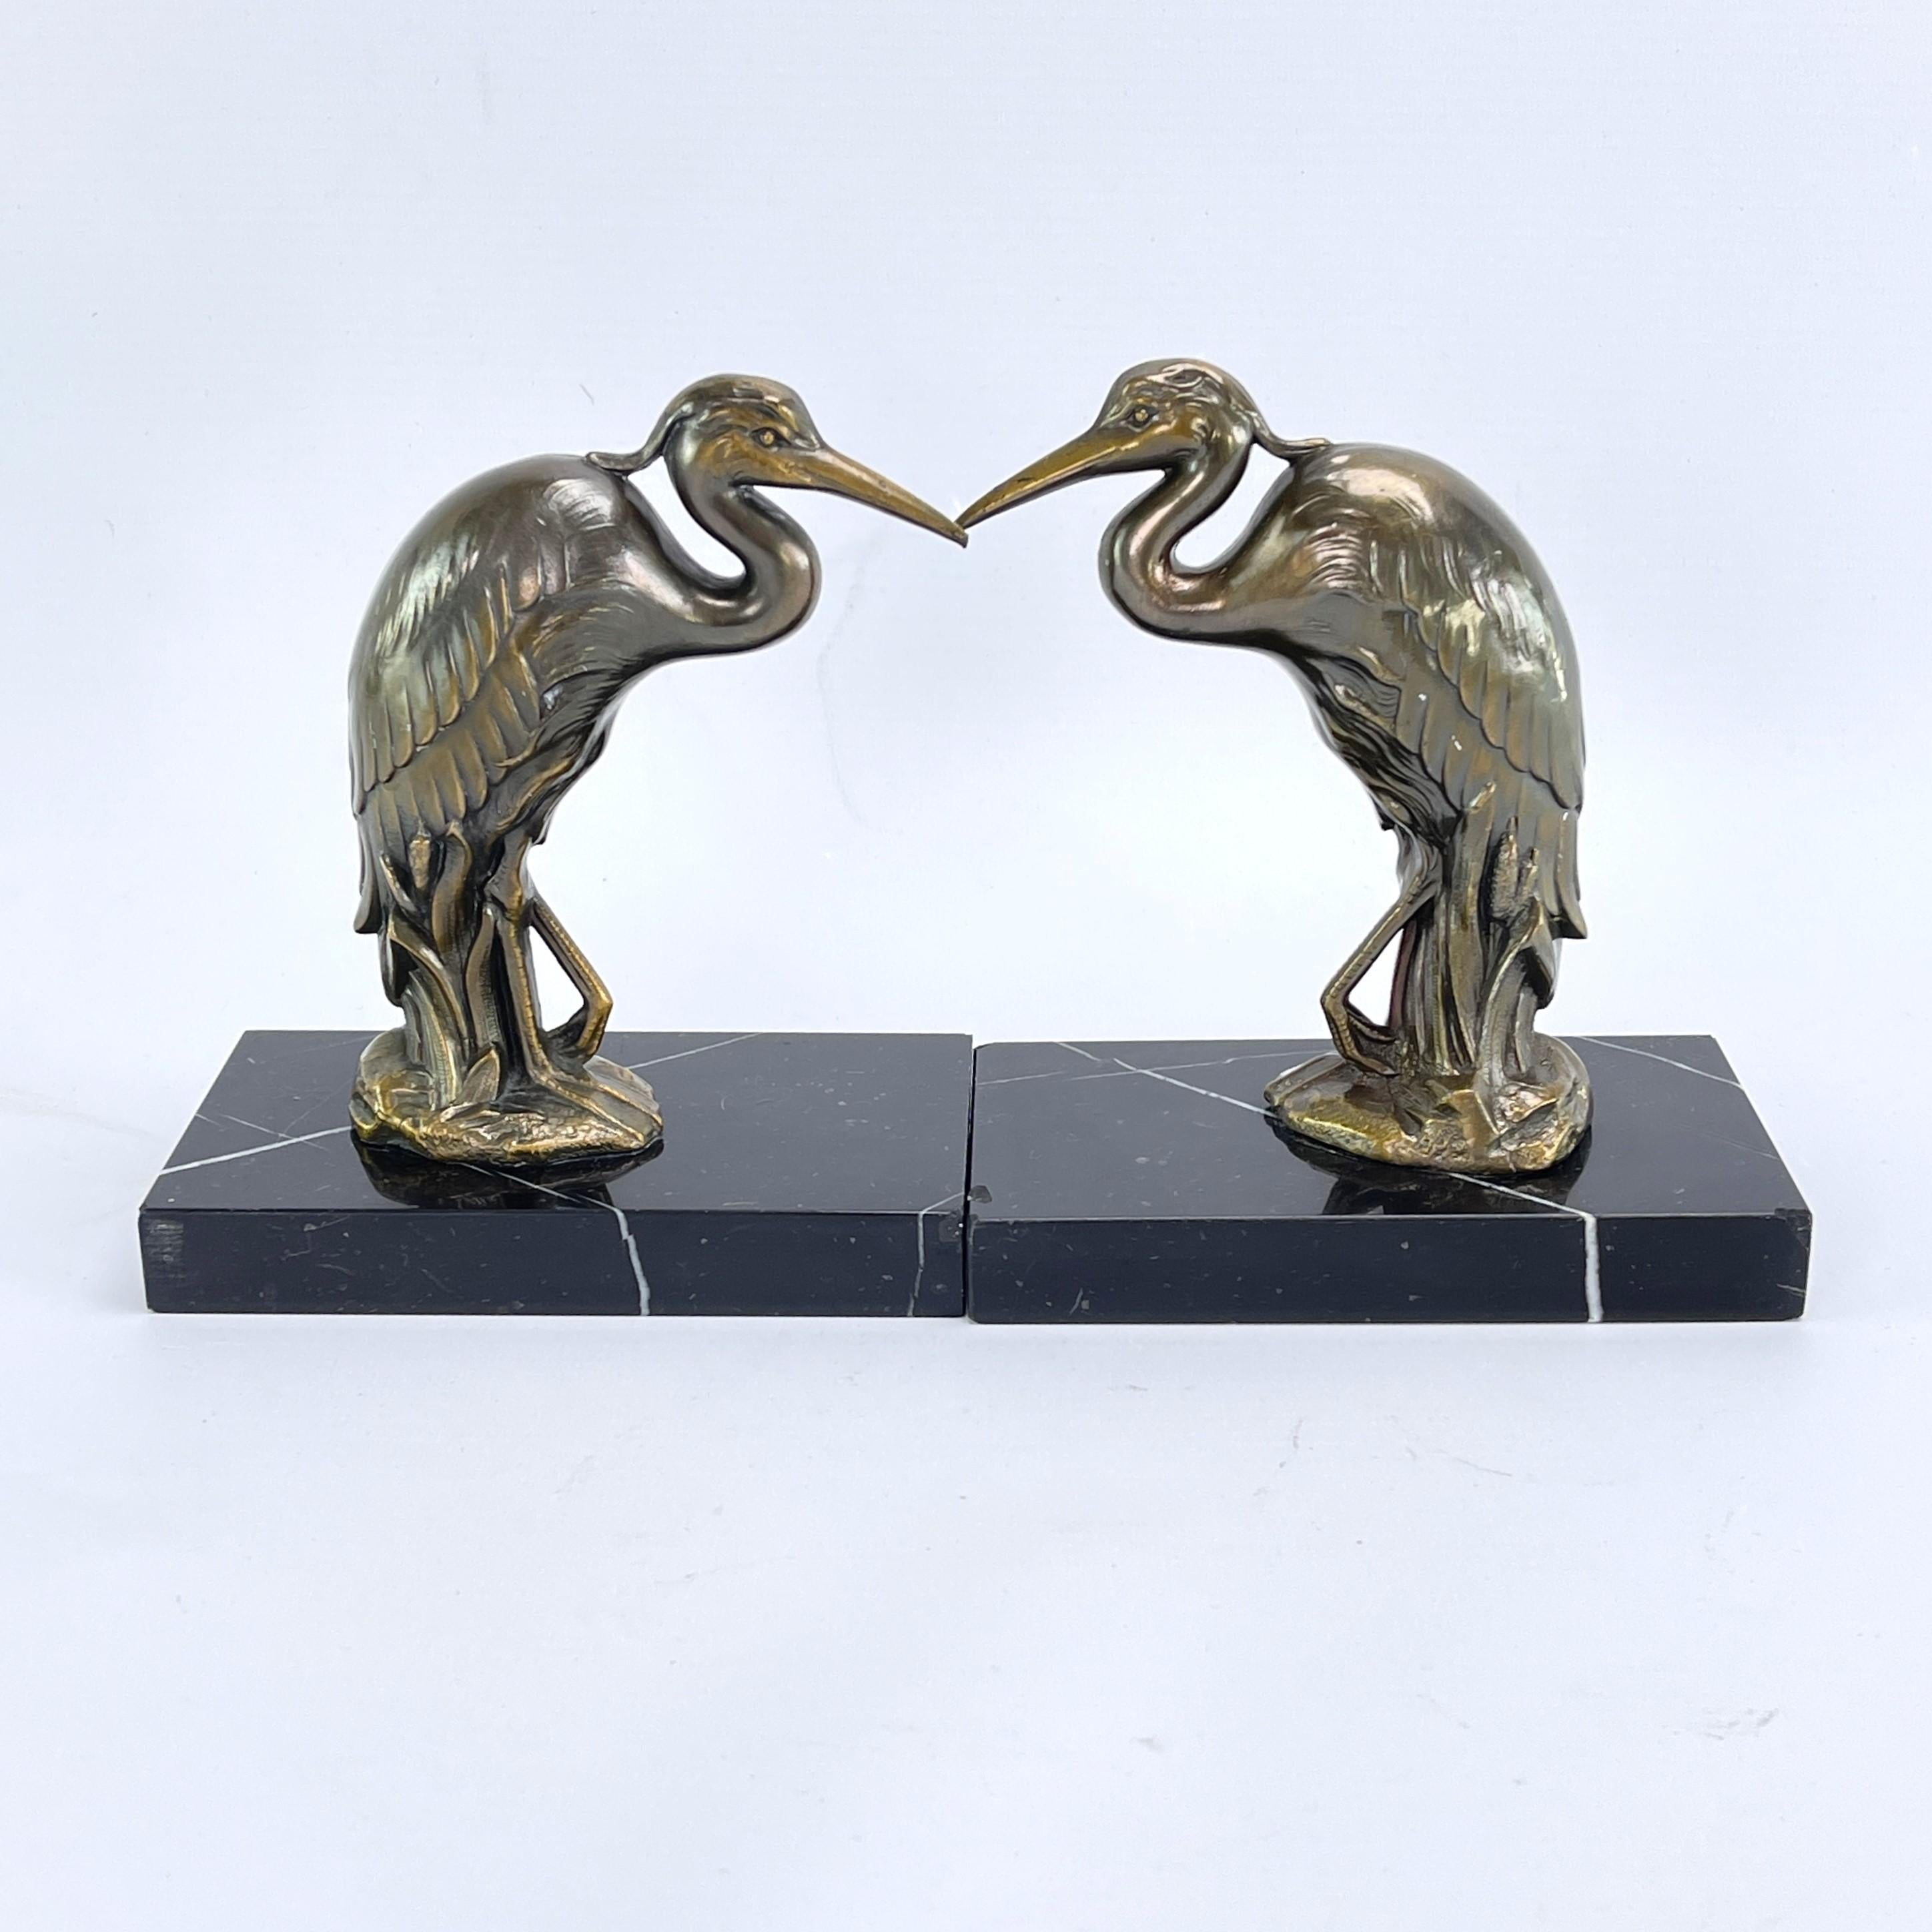 Art Deco heron bird bookends - 1930s

These beautiful heron supports are originals from the 1930s and are typical of the Art Deco period.

Each cleaned item weights 1 kg / 2.2 lbs.